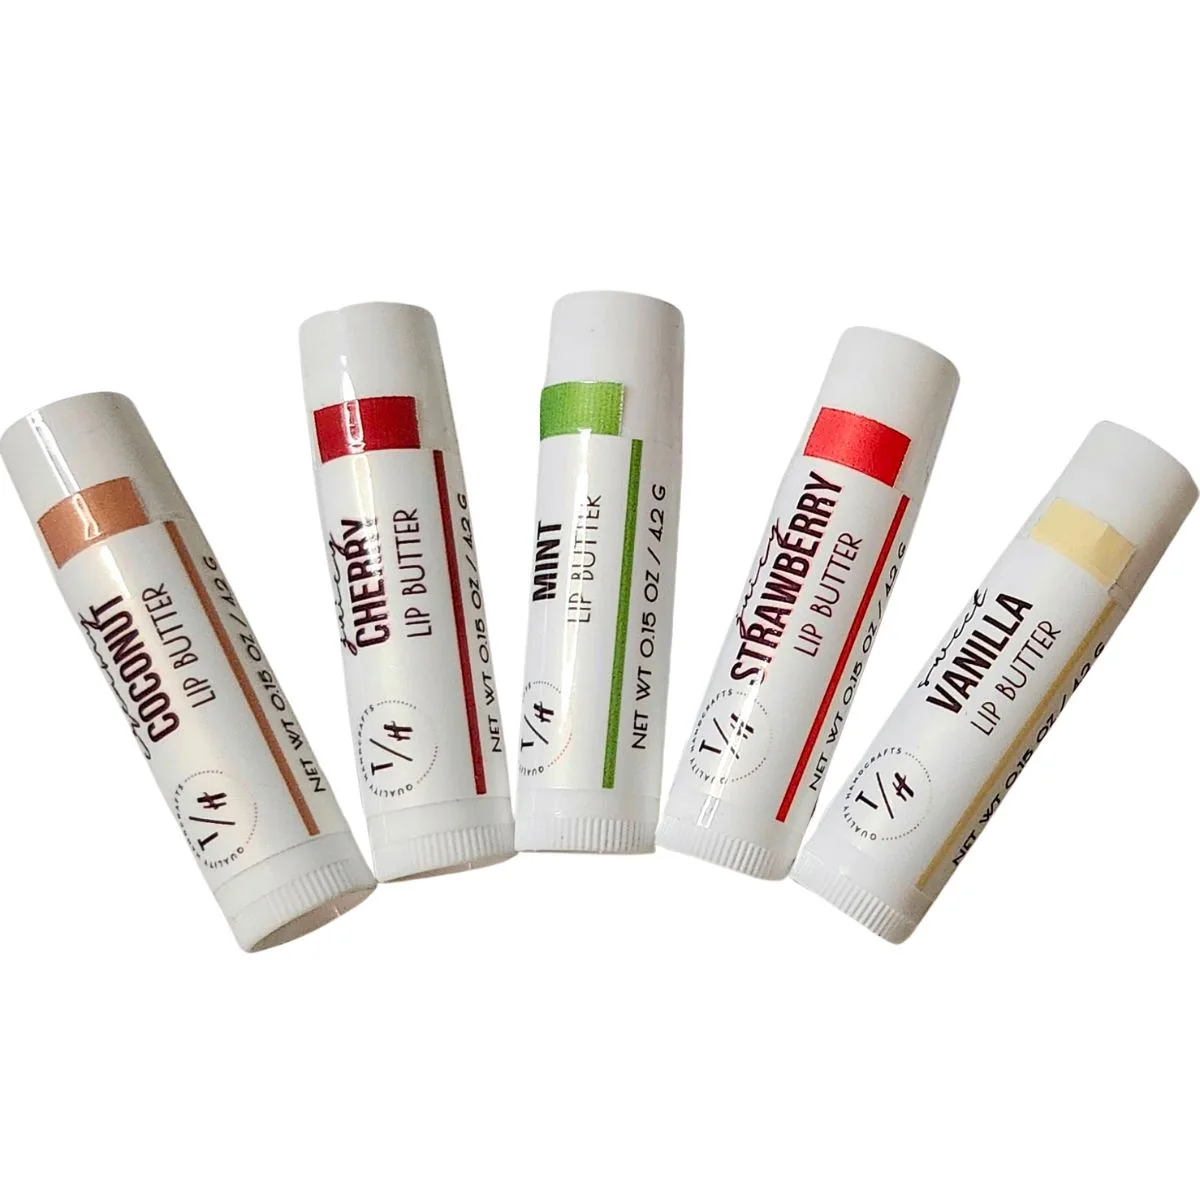 5 tubes of lip balm are displayed